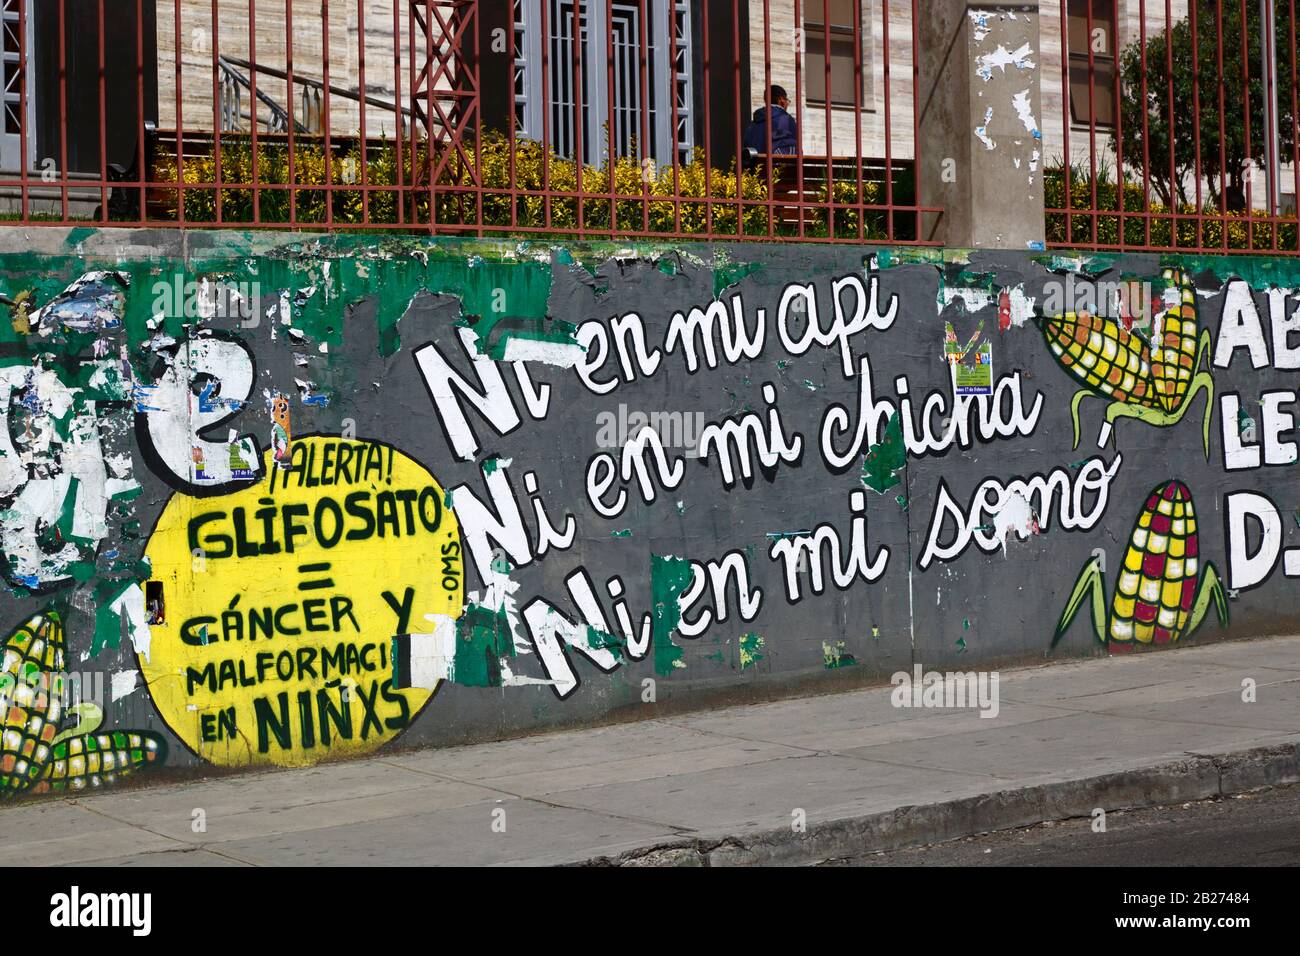 La Paz, Bolivia, 29th February 2020: Mural protesting against transgenic crops next to main UMSA University in La Paz. On the yellow background on the left are warnings about glyphosate causing cancer and deformities in children. The phrases "Ni en mi / Not in my api" etc refer to api, chicha and somo, popular traditional Bolivian drinks that are made using maize / corn. Stock Photo